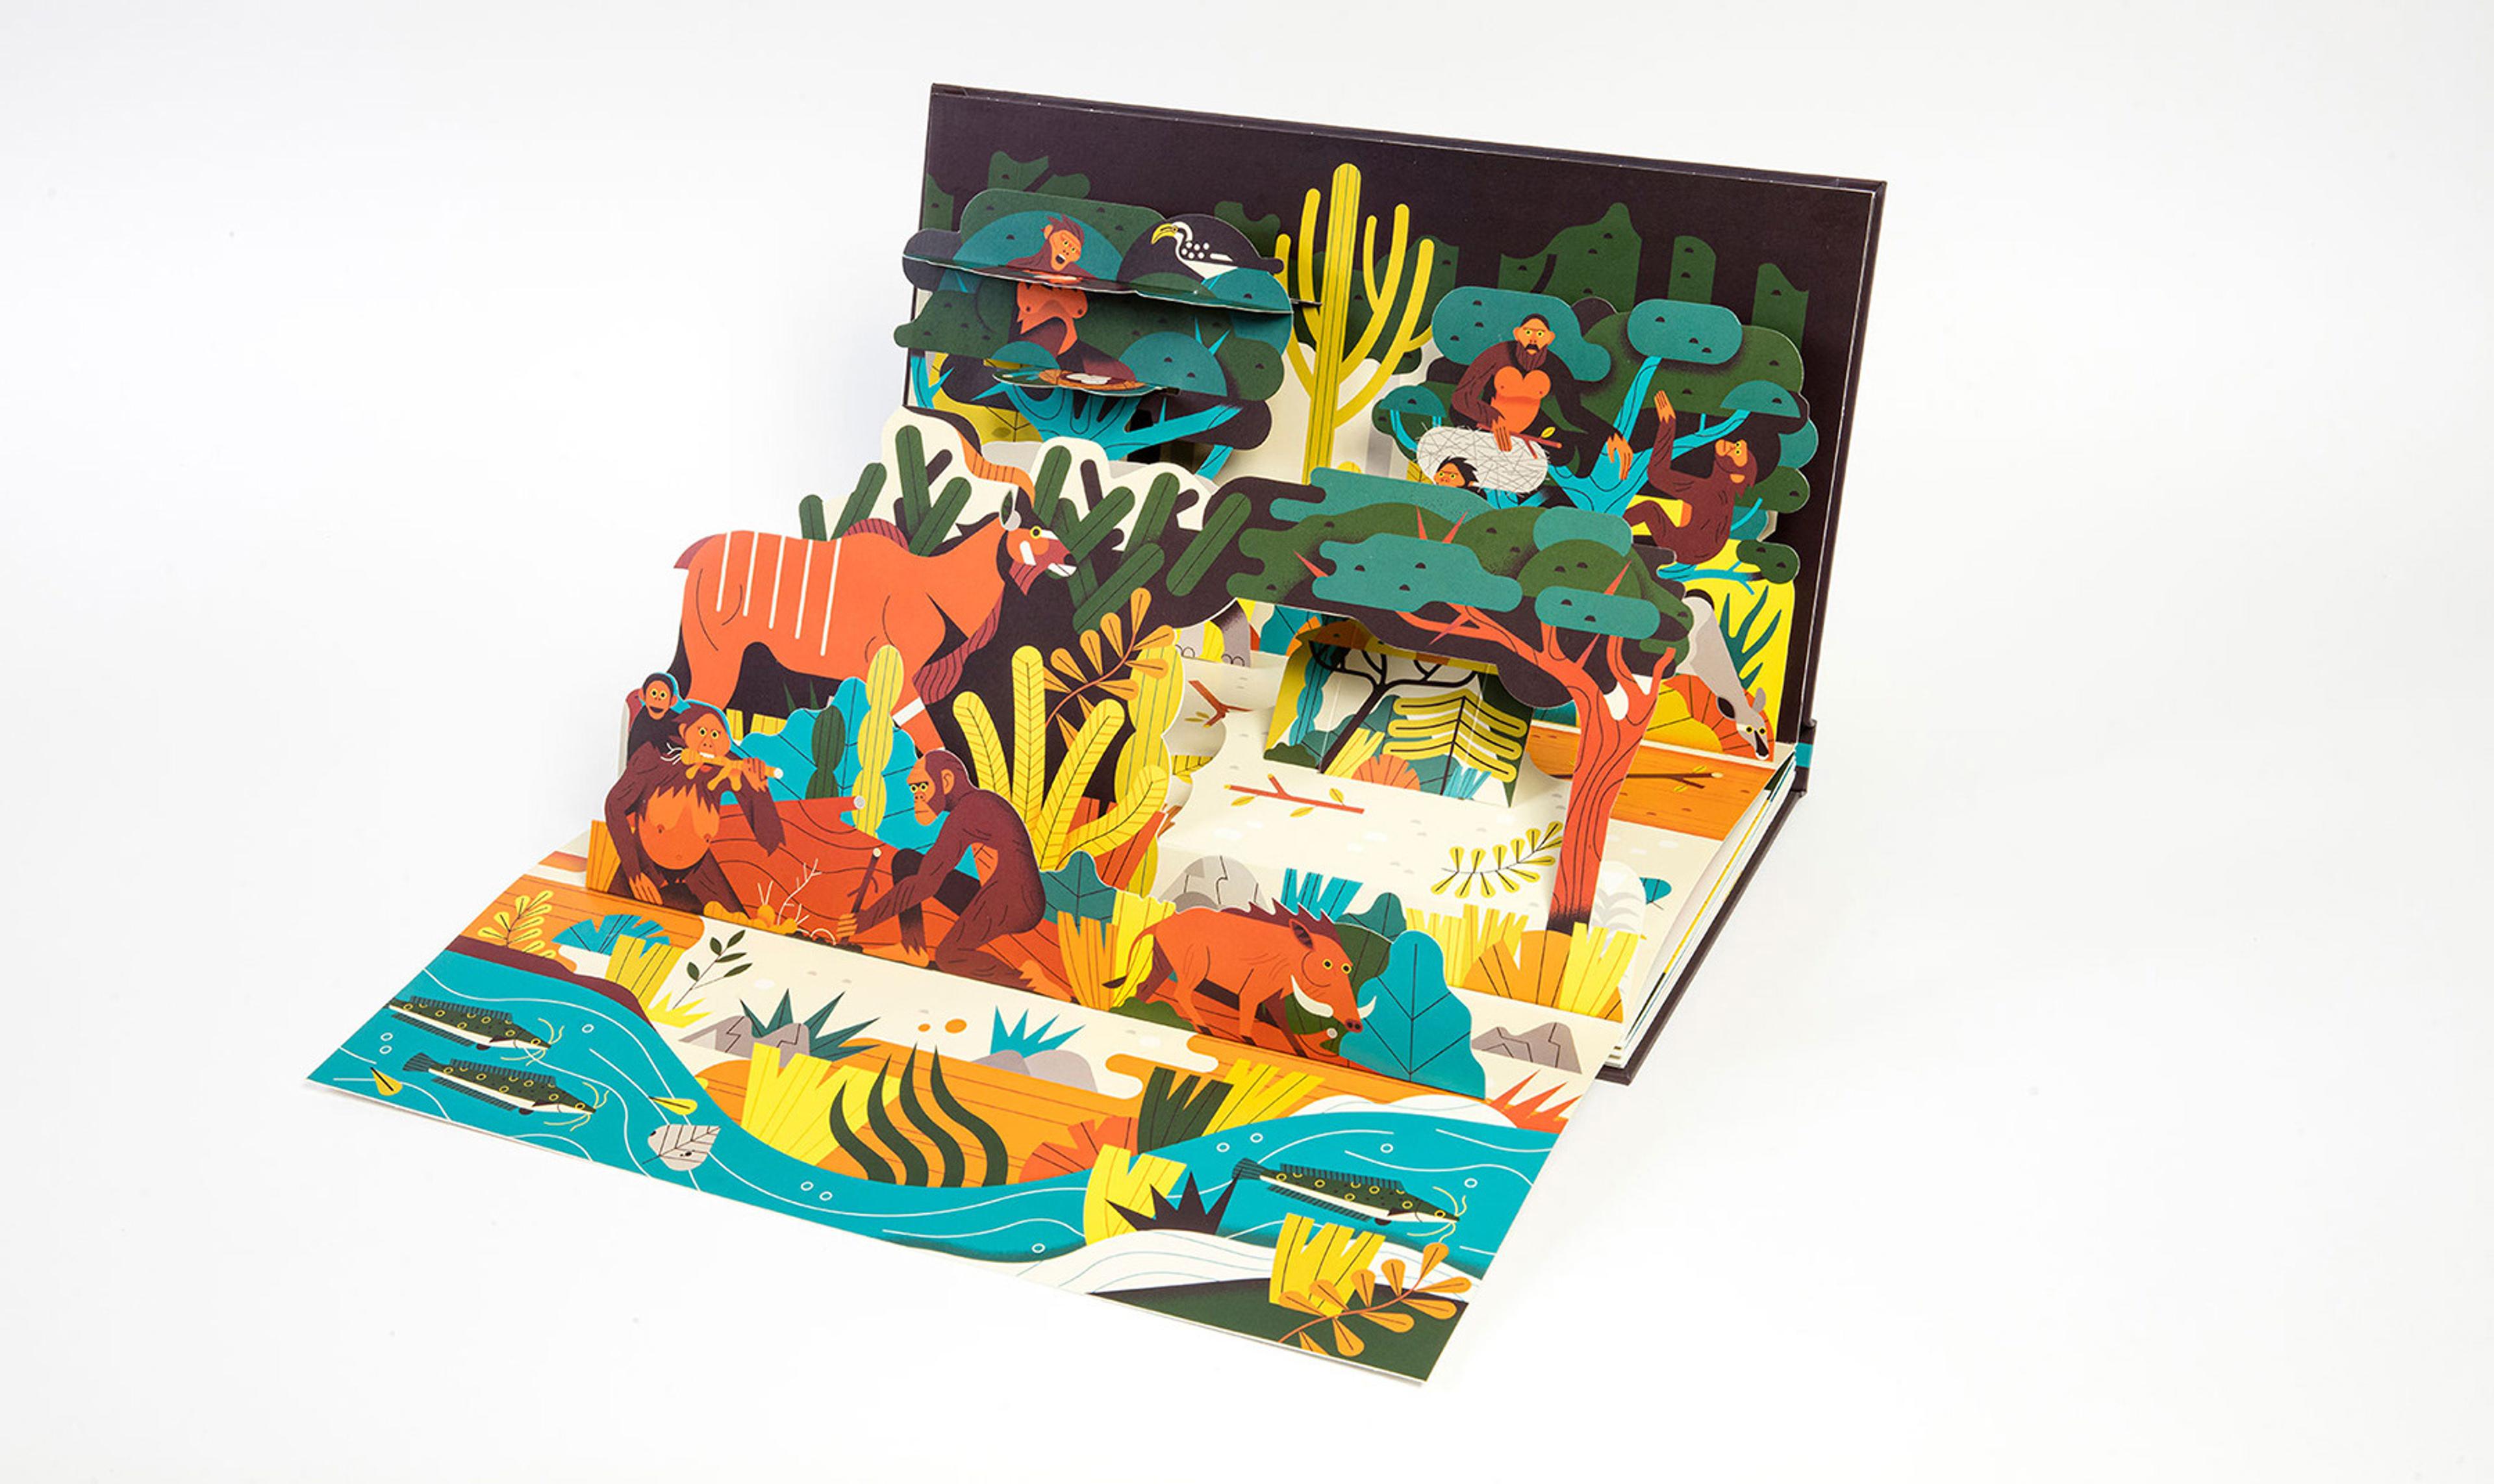 Pop-up book with animals and trees